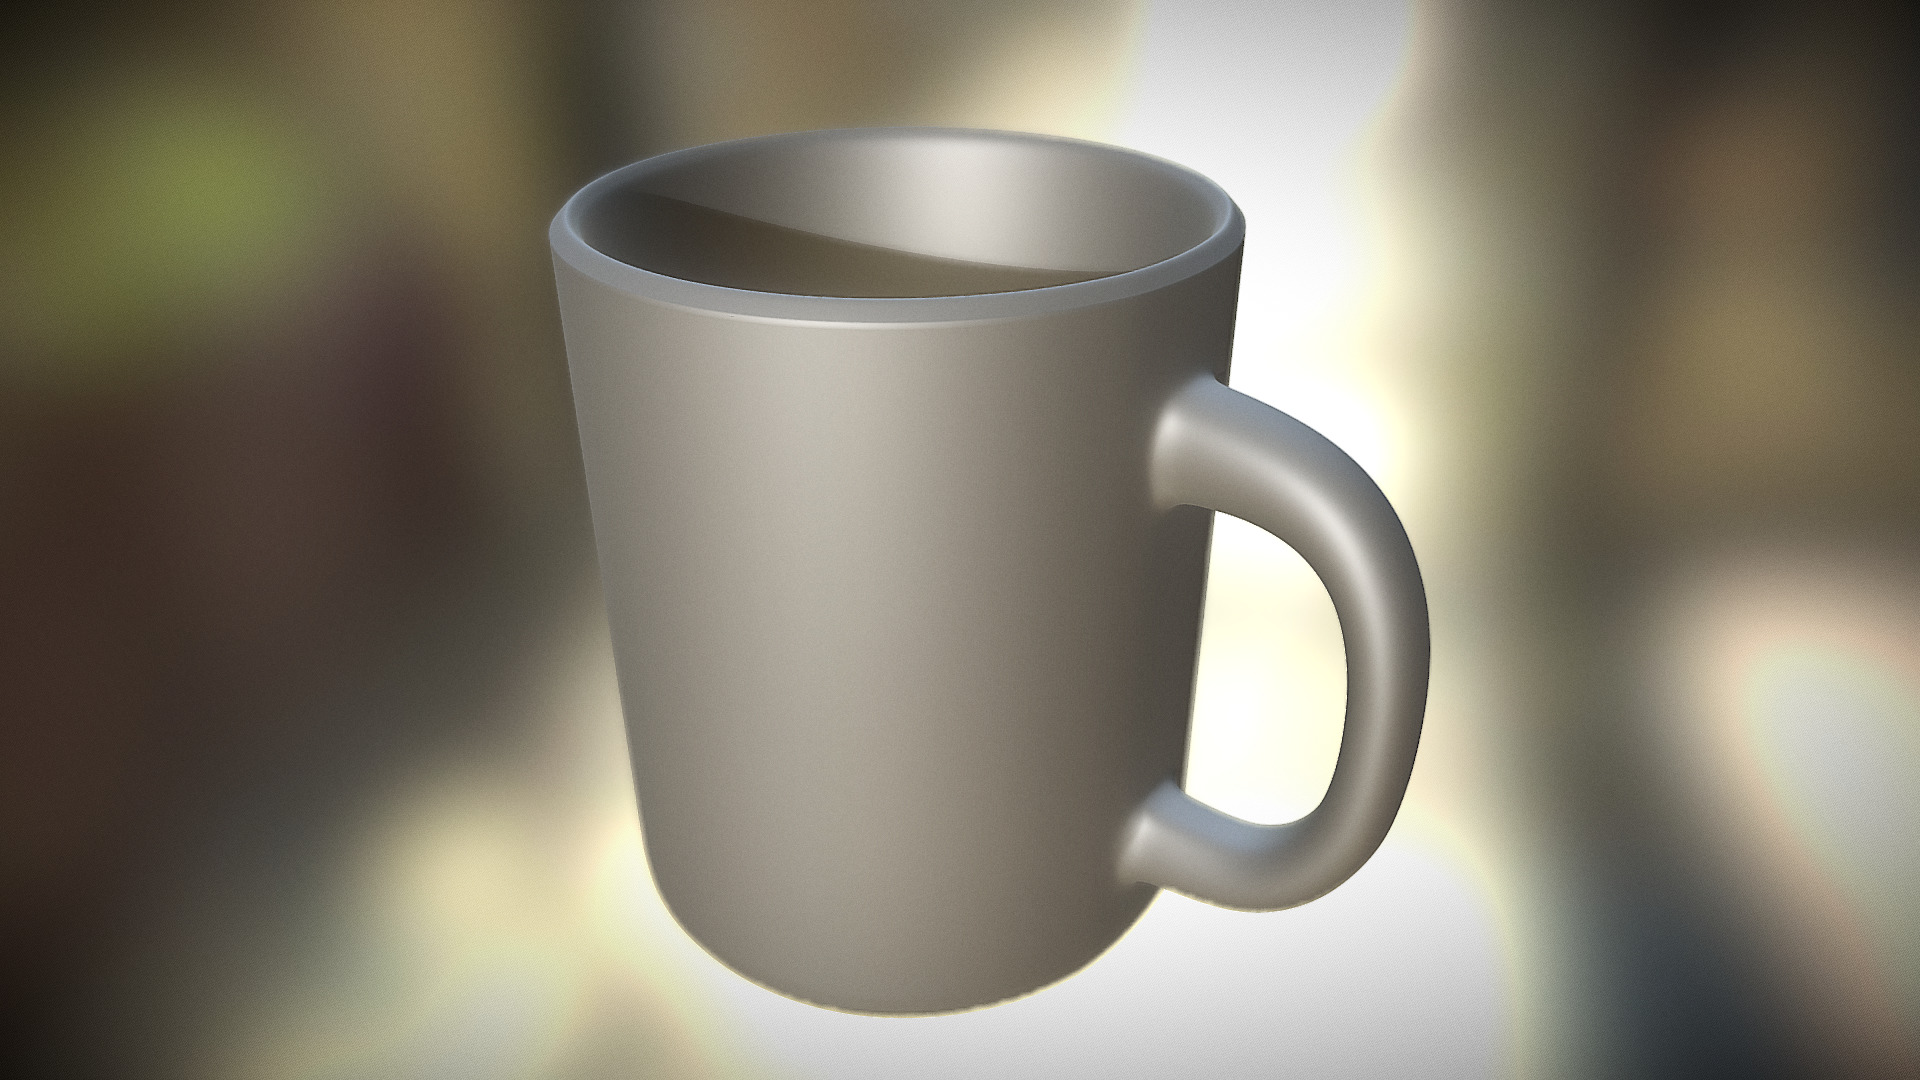 3D model Coffee Cup High Poly - This is a 3D model of the Coffee Cup High Poly. The 3D model is about a white coffee mug.